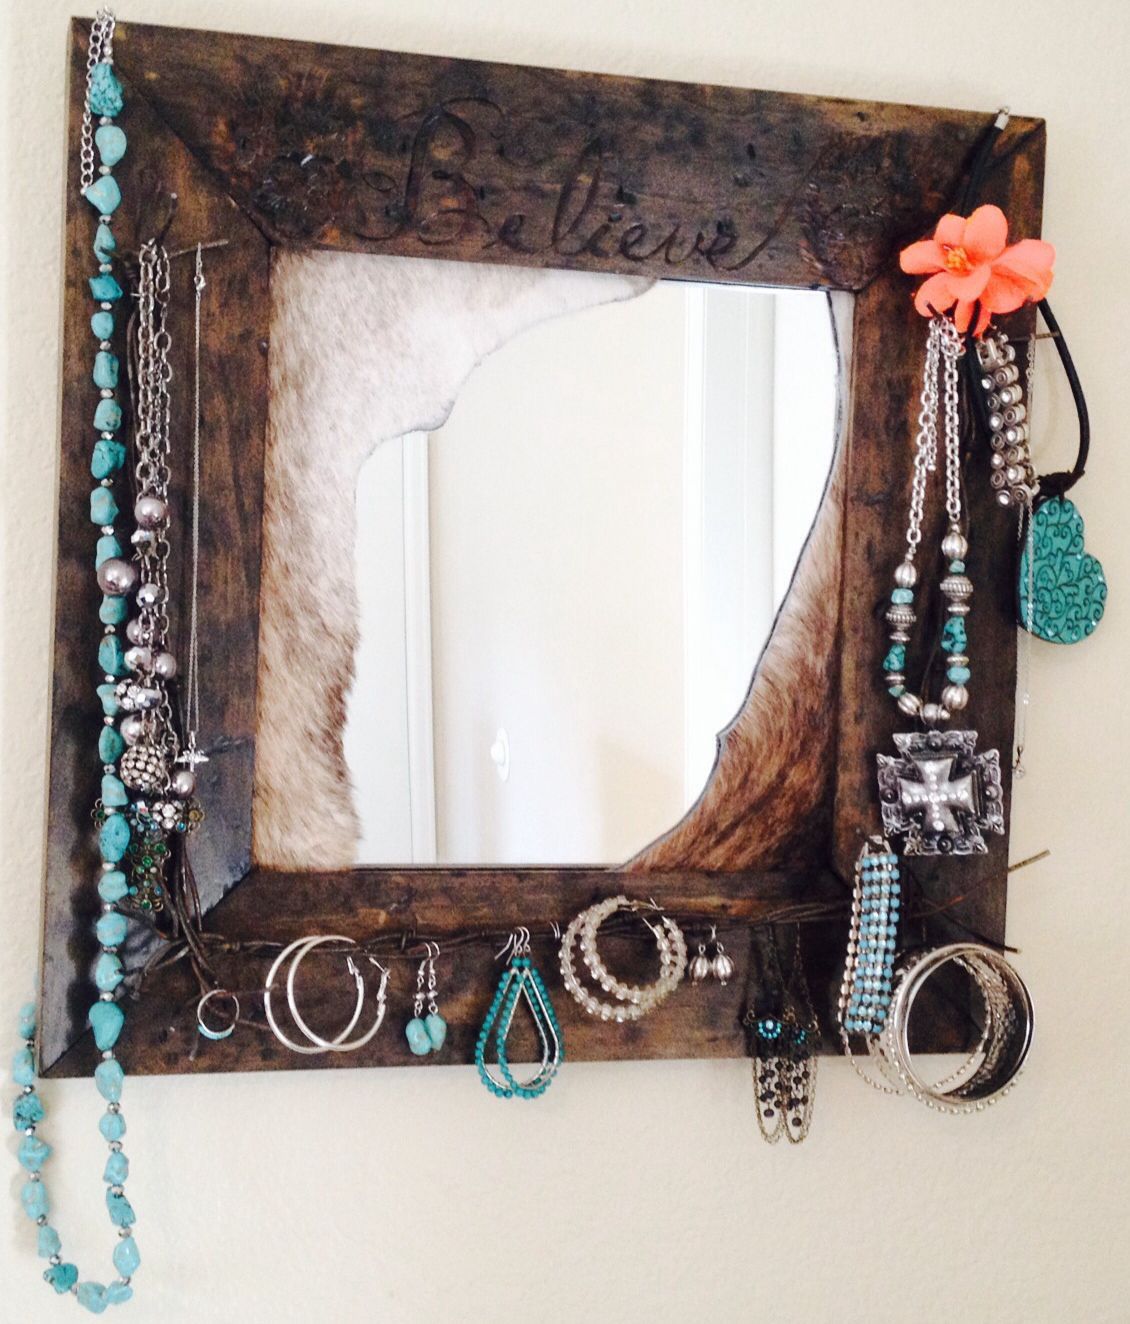 Beautiful "believe" Mirror With Jewelry Hanging On It | Jewelry Mirror Regarding Western Wall Mirrors (View 5 of 15)